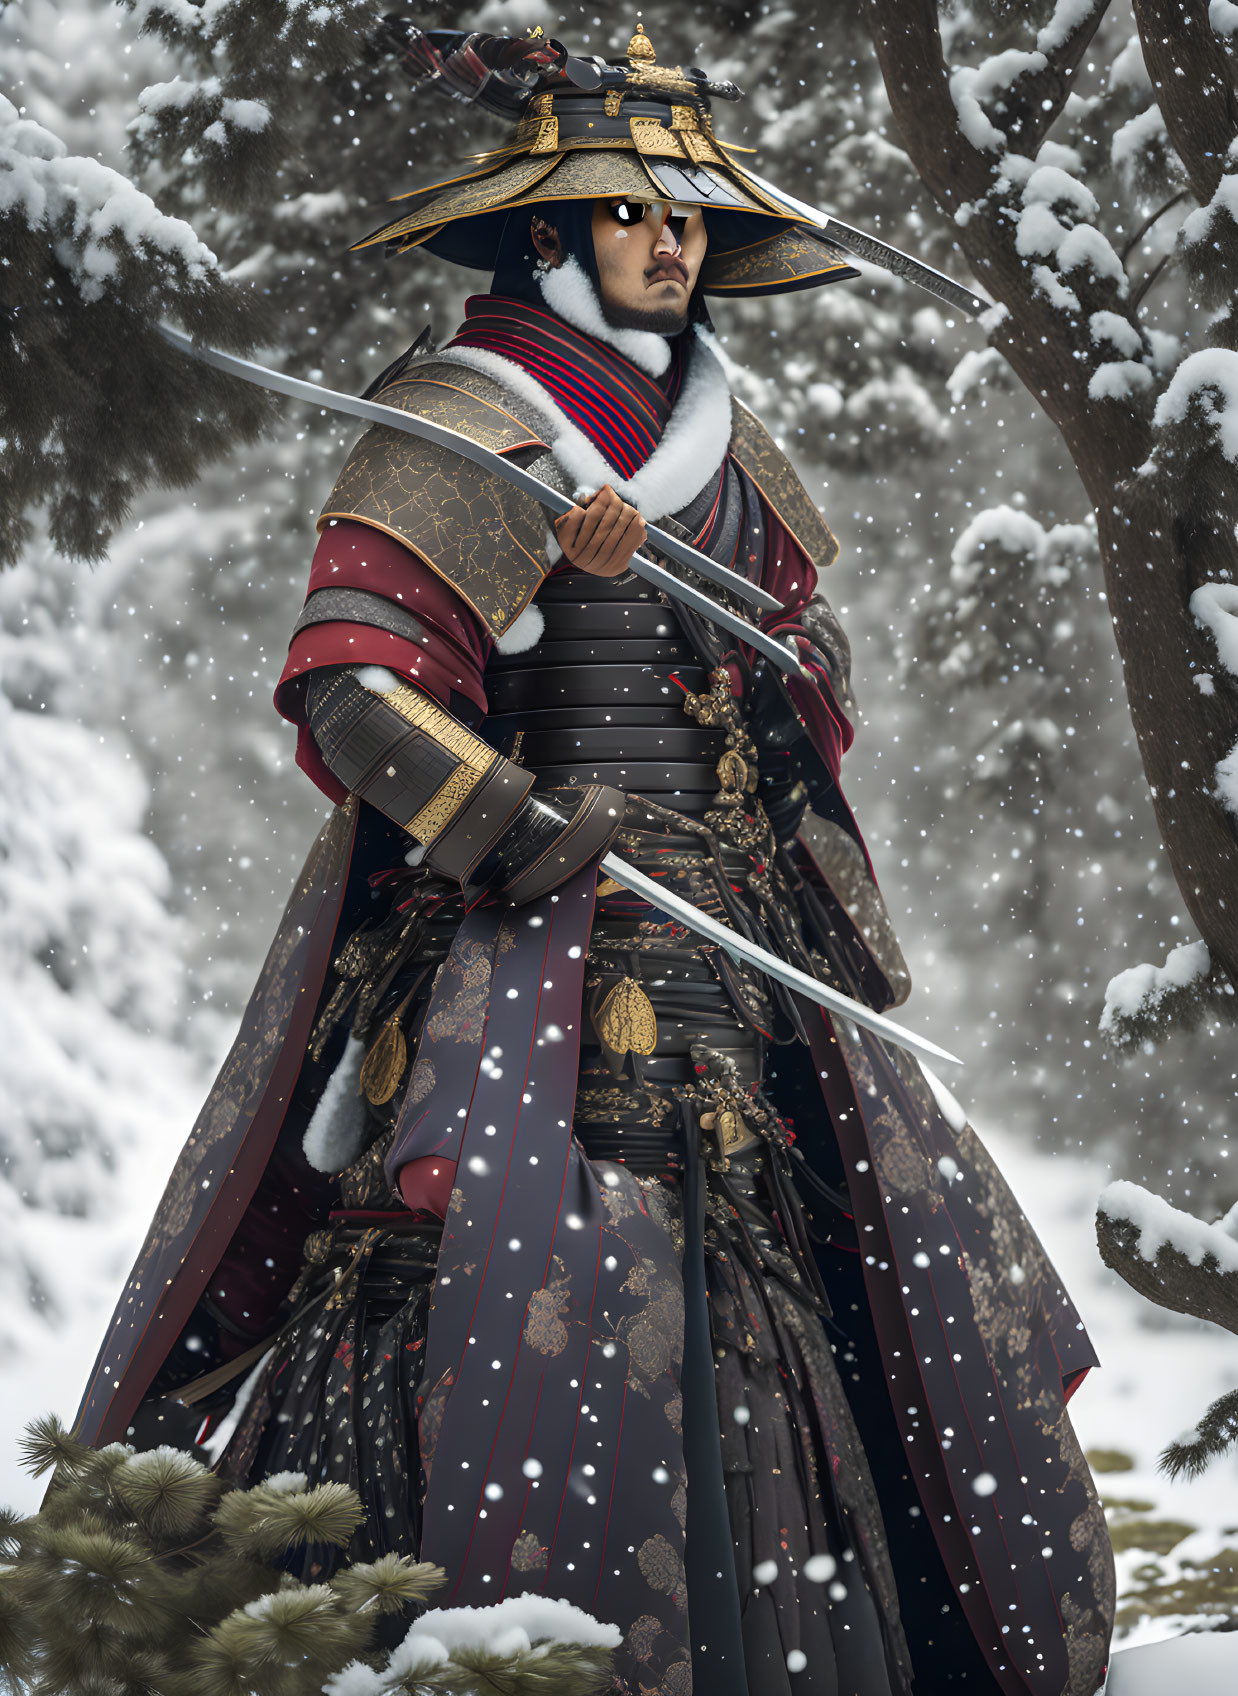 Traditional Japanese samurai in armor with sword in falling snow